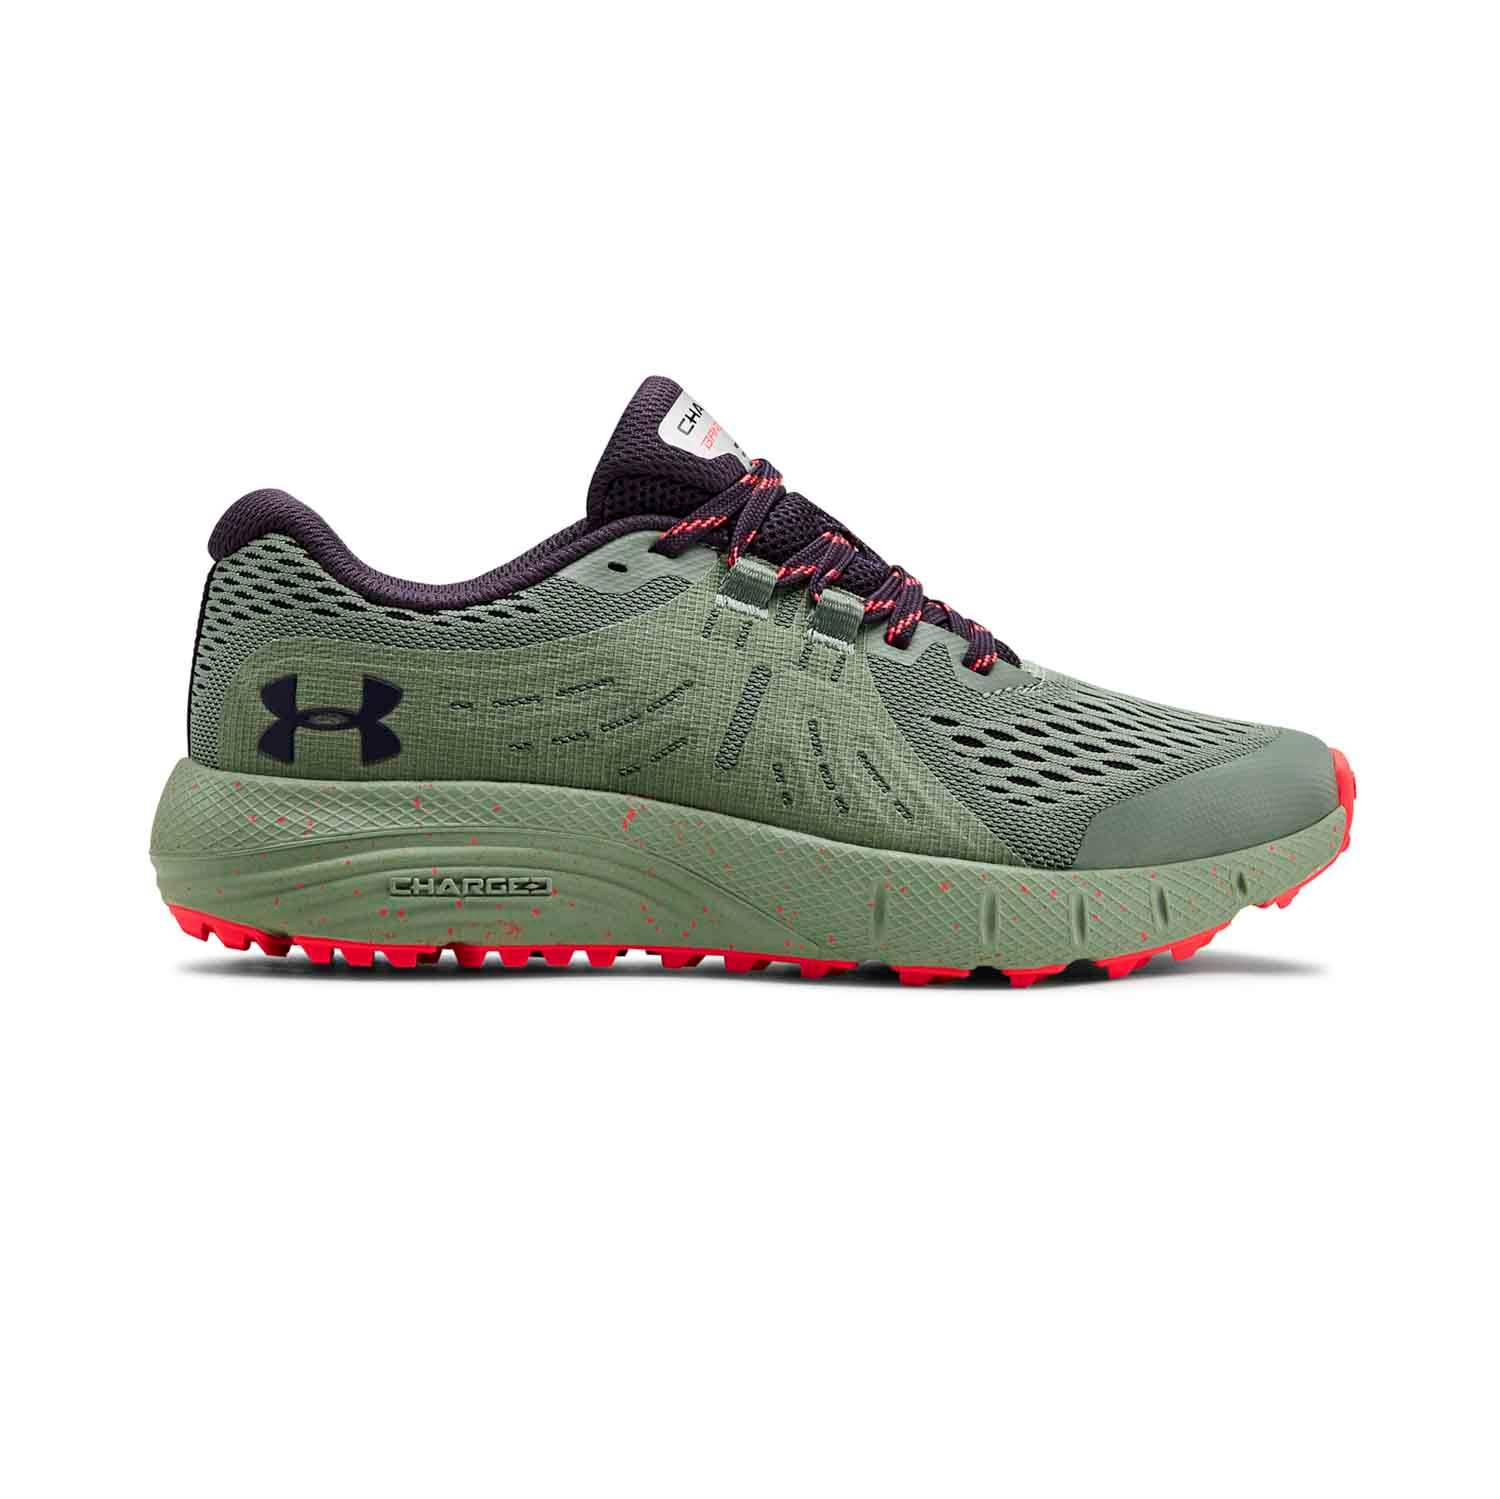 UNDER ARMOUR WOMEN’S CHARGED BANDIT TRAIL RUNNING SHOES